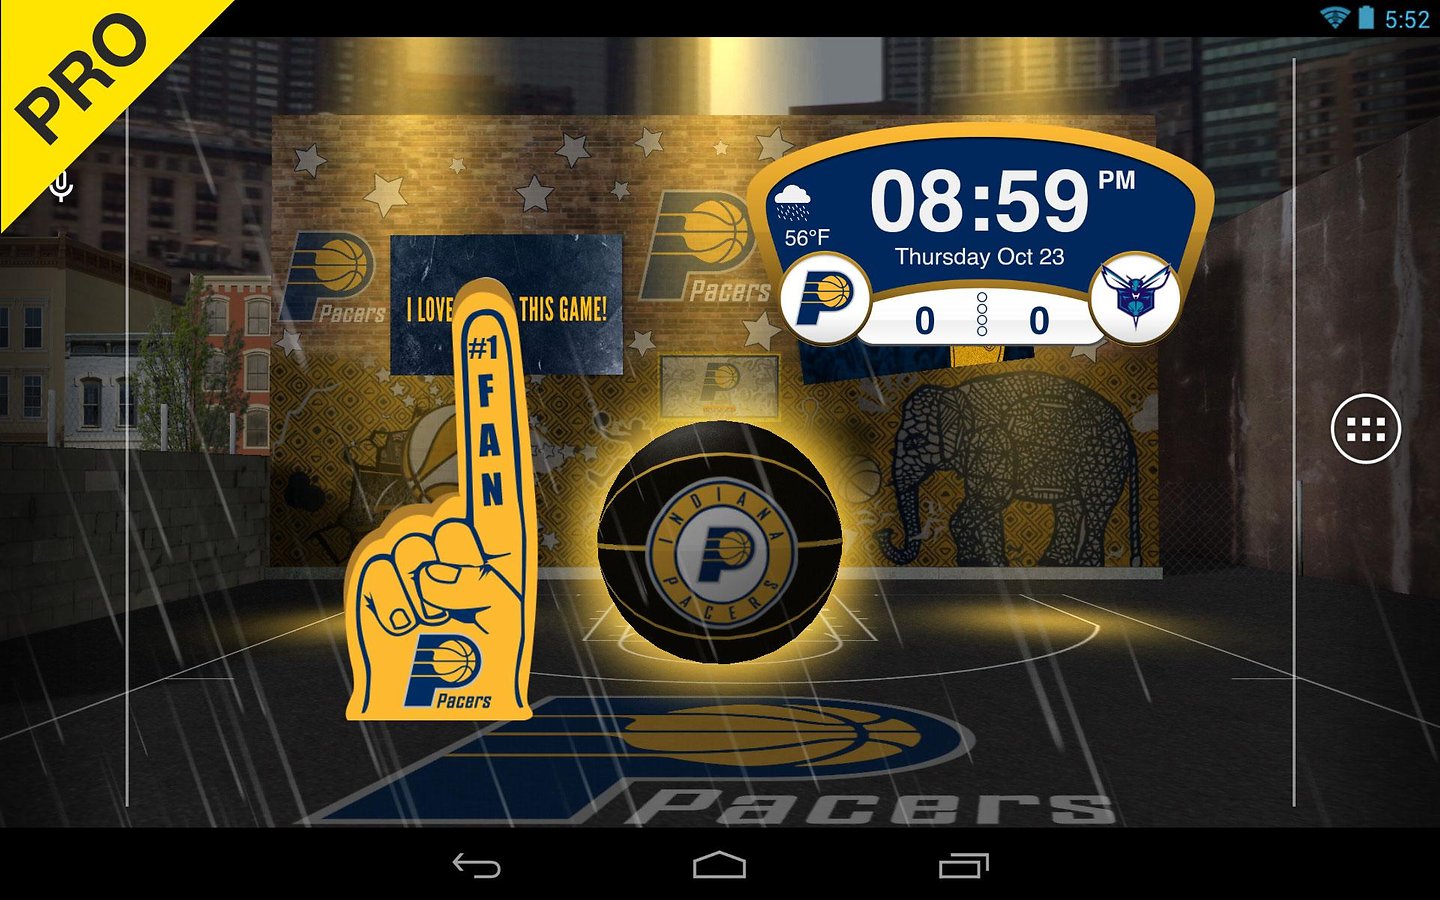 NBA 2016 Live Wallpaper   Android Apps and Tests   AndroidPIT